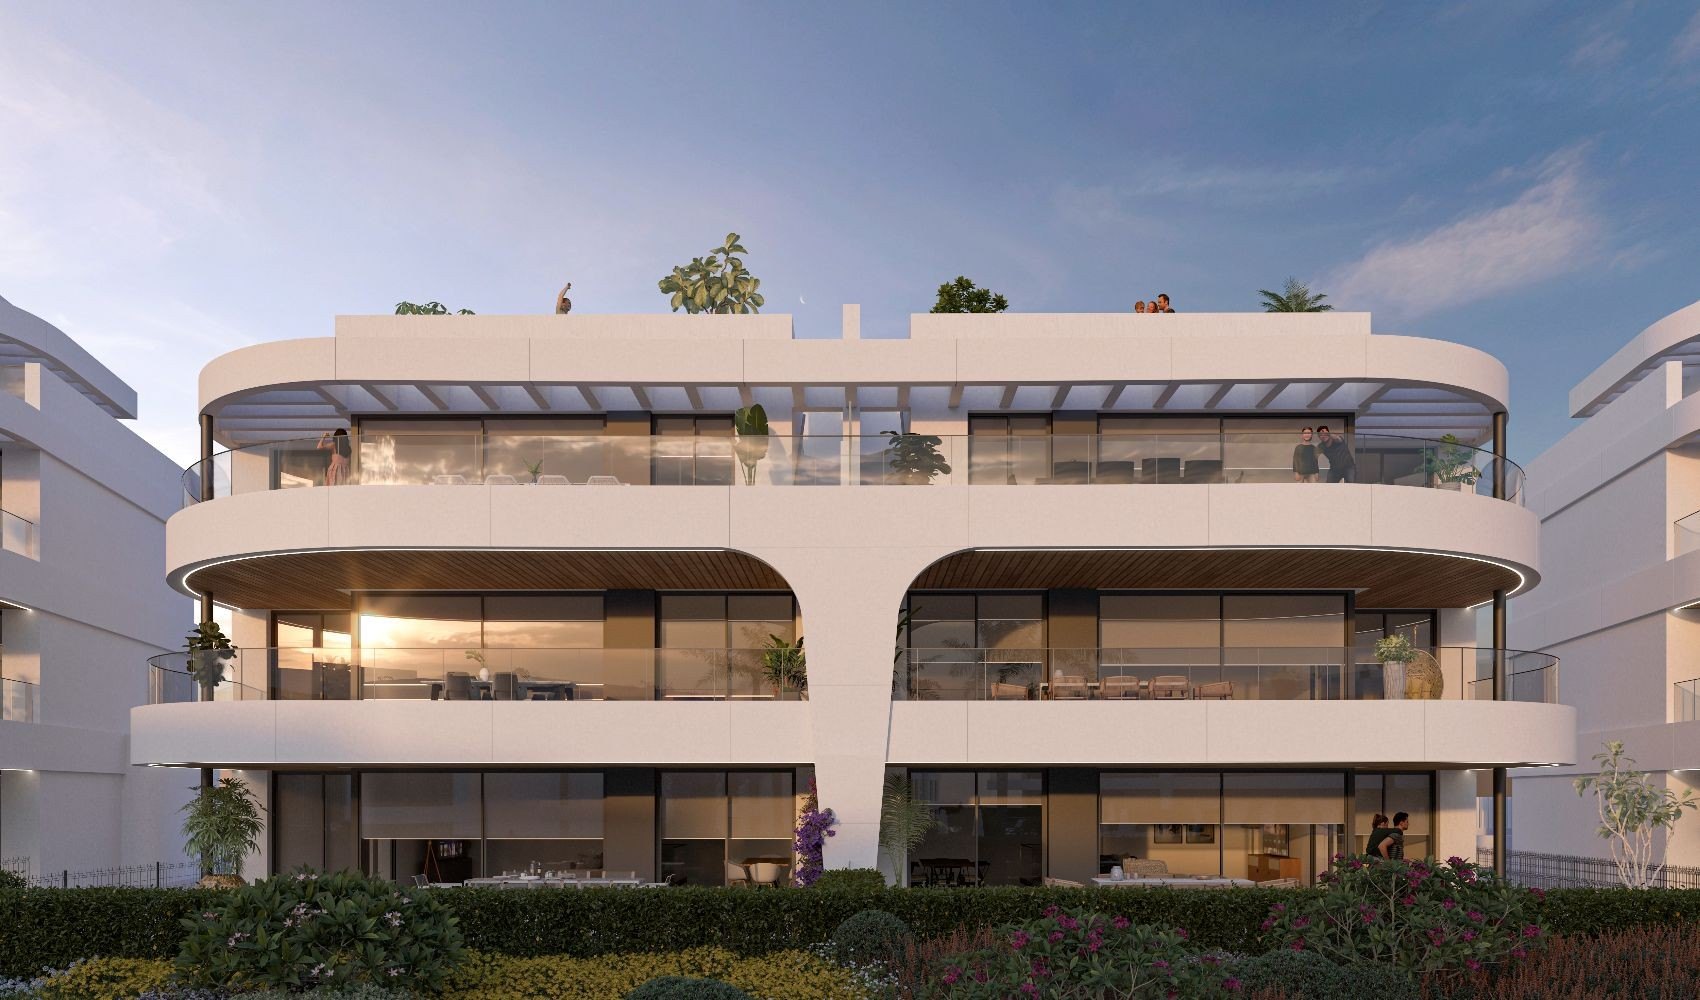 3 BEDROOM PENTHOUSE IN HIGH QUALITY BRAND NEW COMPLEX IN ATALAYA - NEW GOLDEN MILE - ESTEPONA